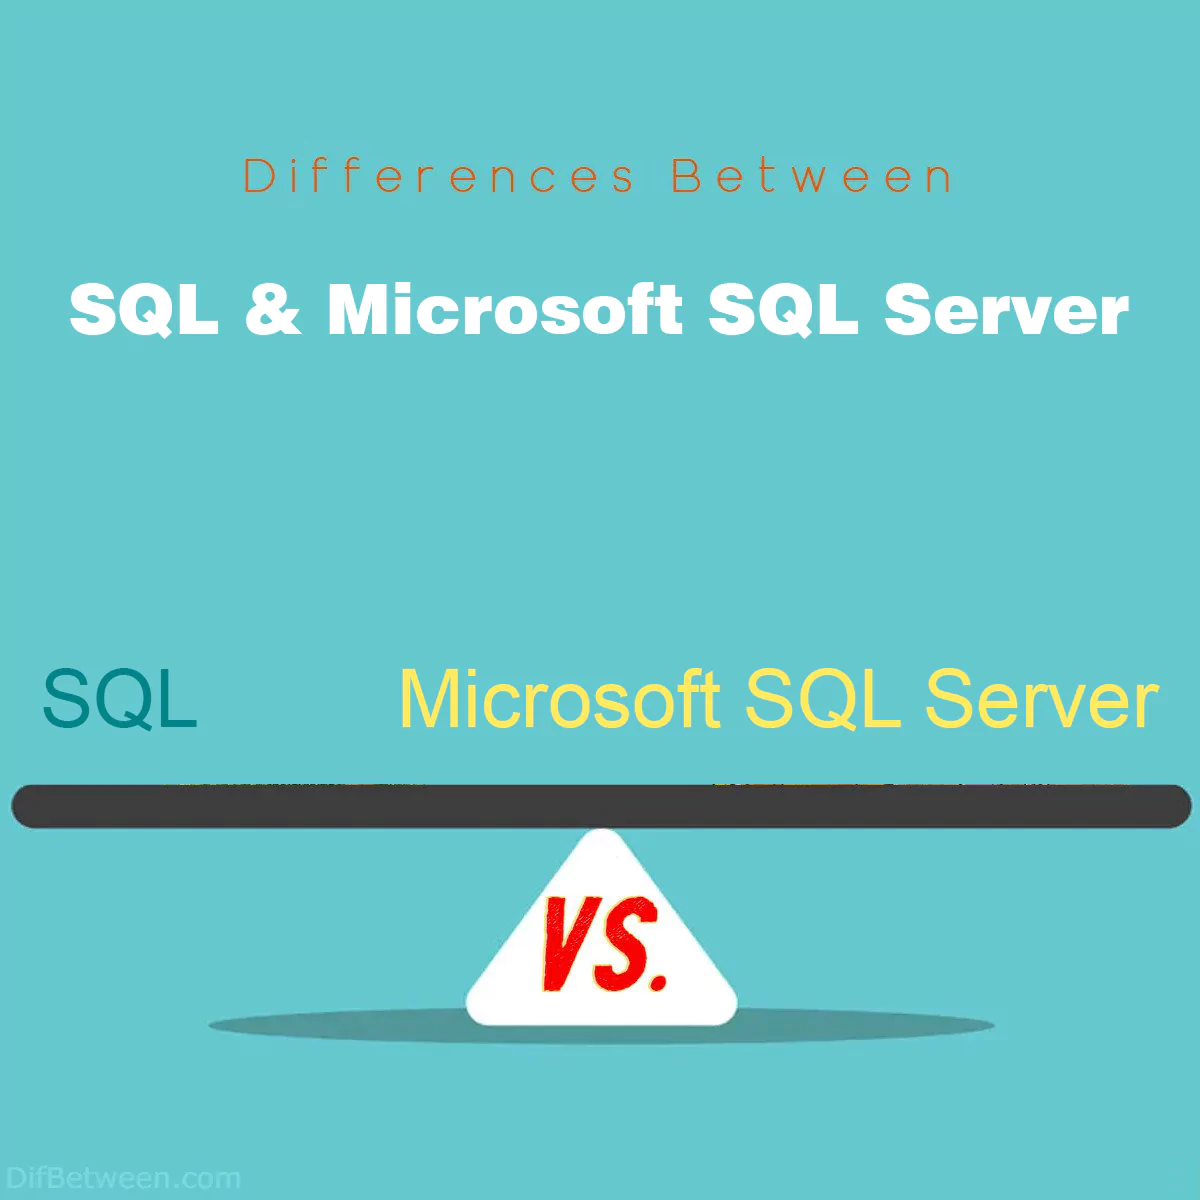 Differences Between SQL and Microsoft SQL Server